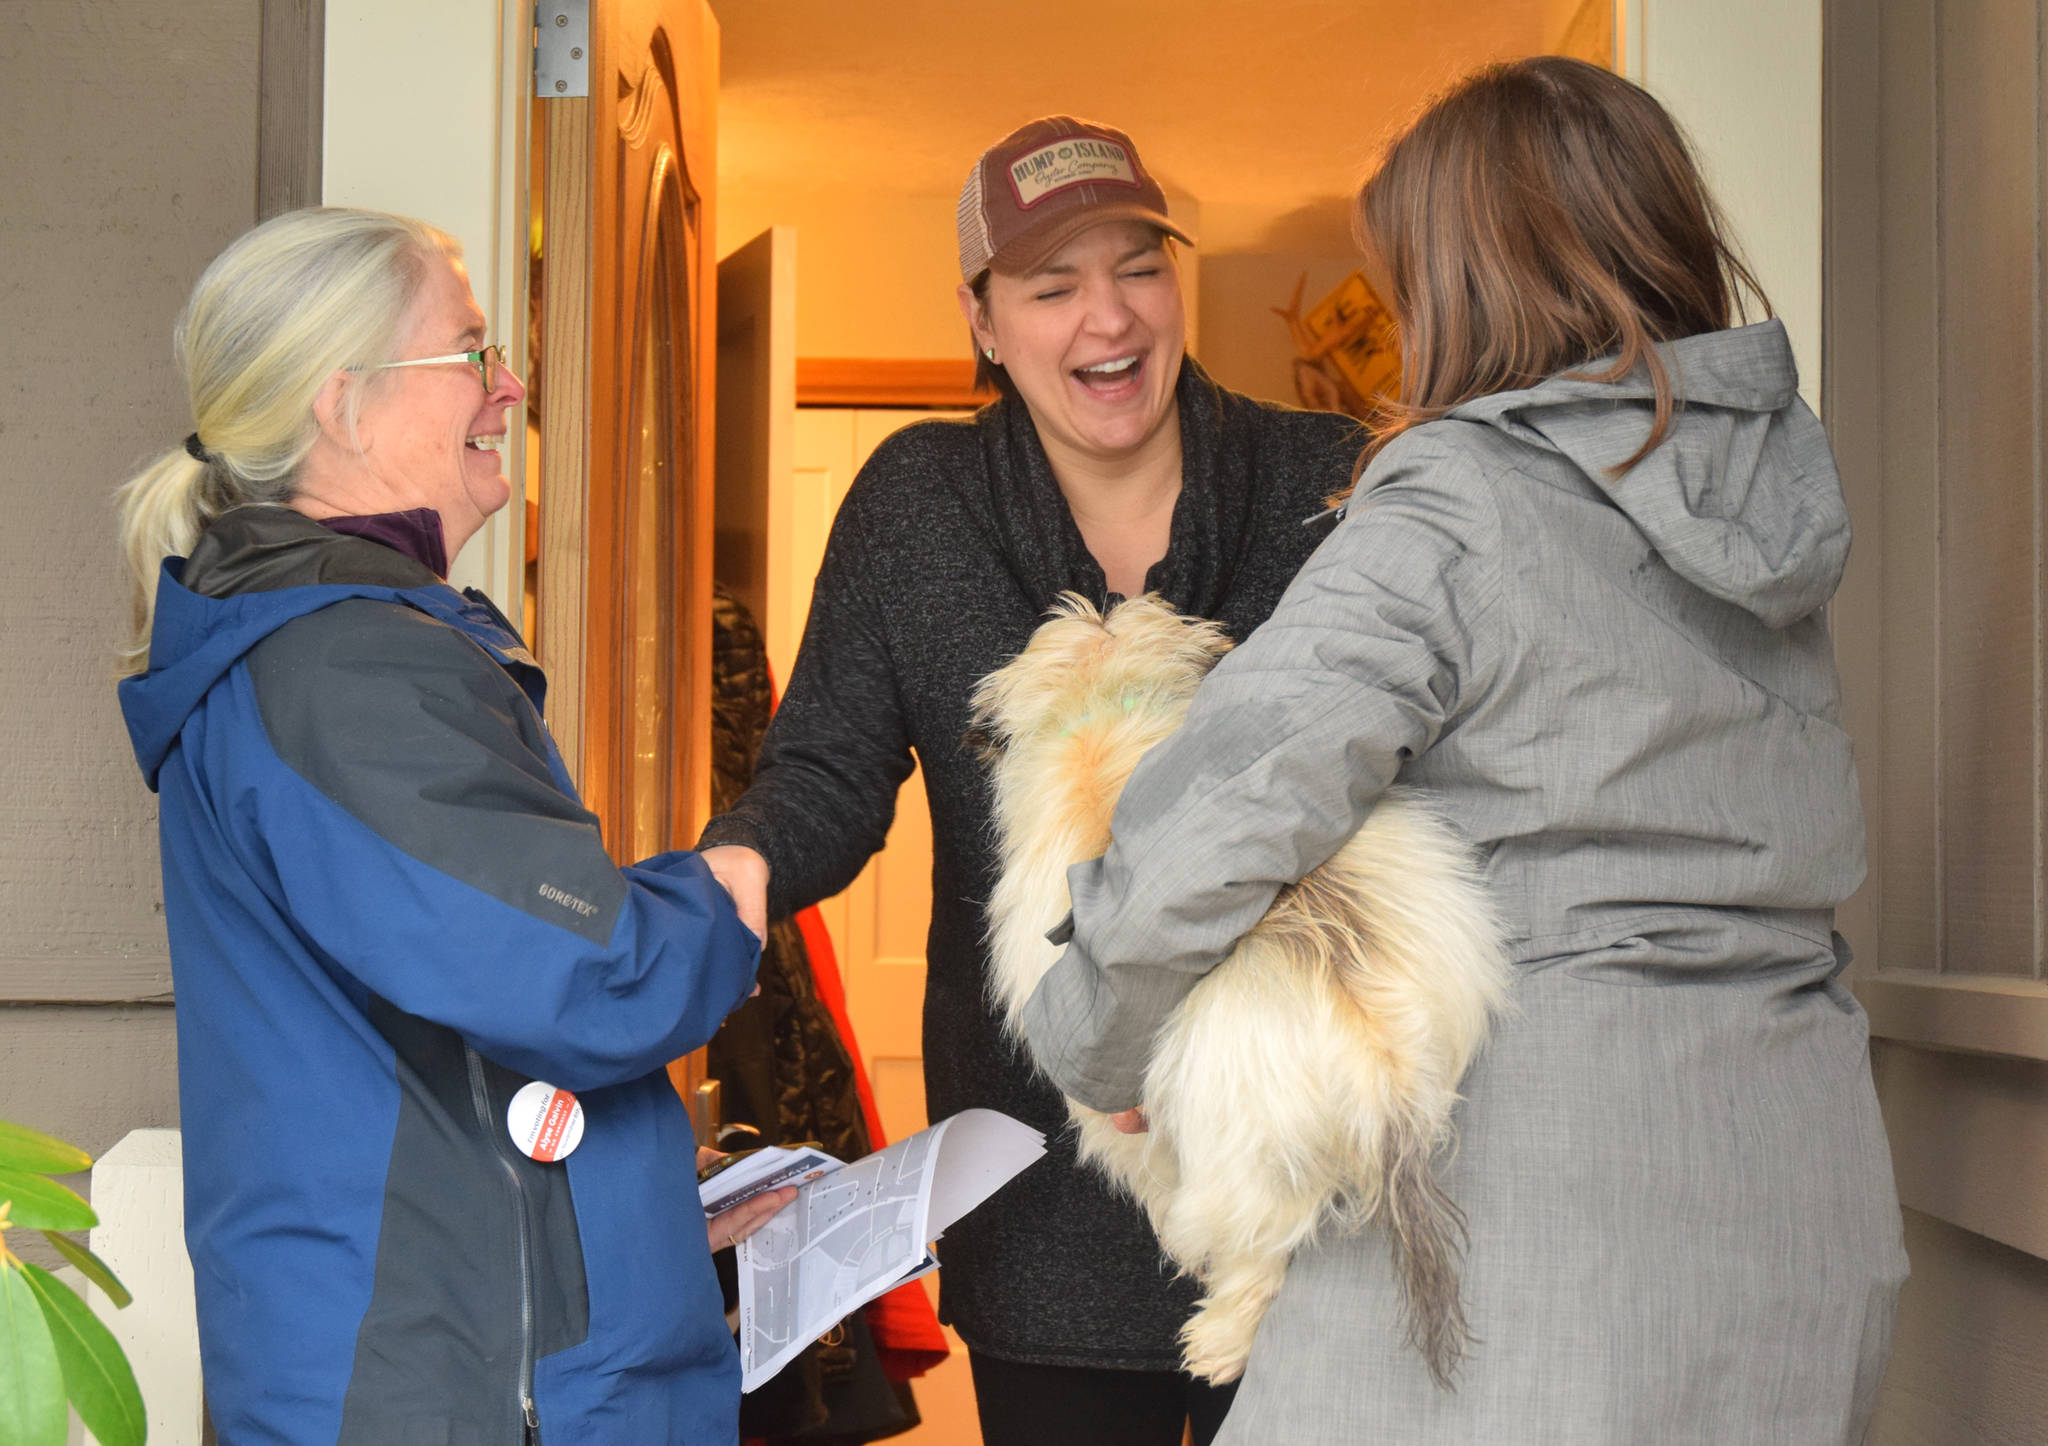 Alaska labor commissioner Heidi Drygas reacts after opening her front door to find Alaska’s indpendent Congressional candidate, Alyse Galvin, on Sunday, Nov. 4, 2018. Galvin is holding Drygas’ dog. (James Brooks | Juneau Empire)